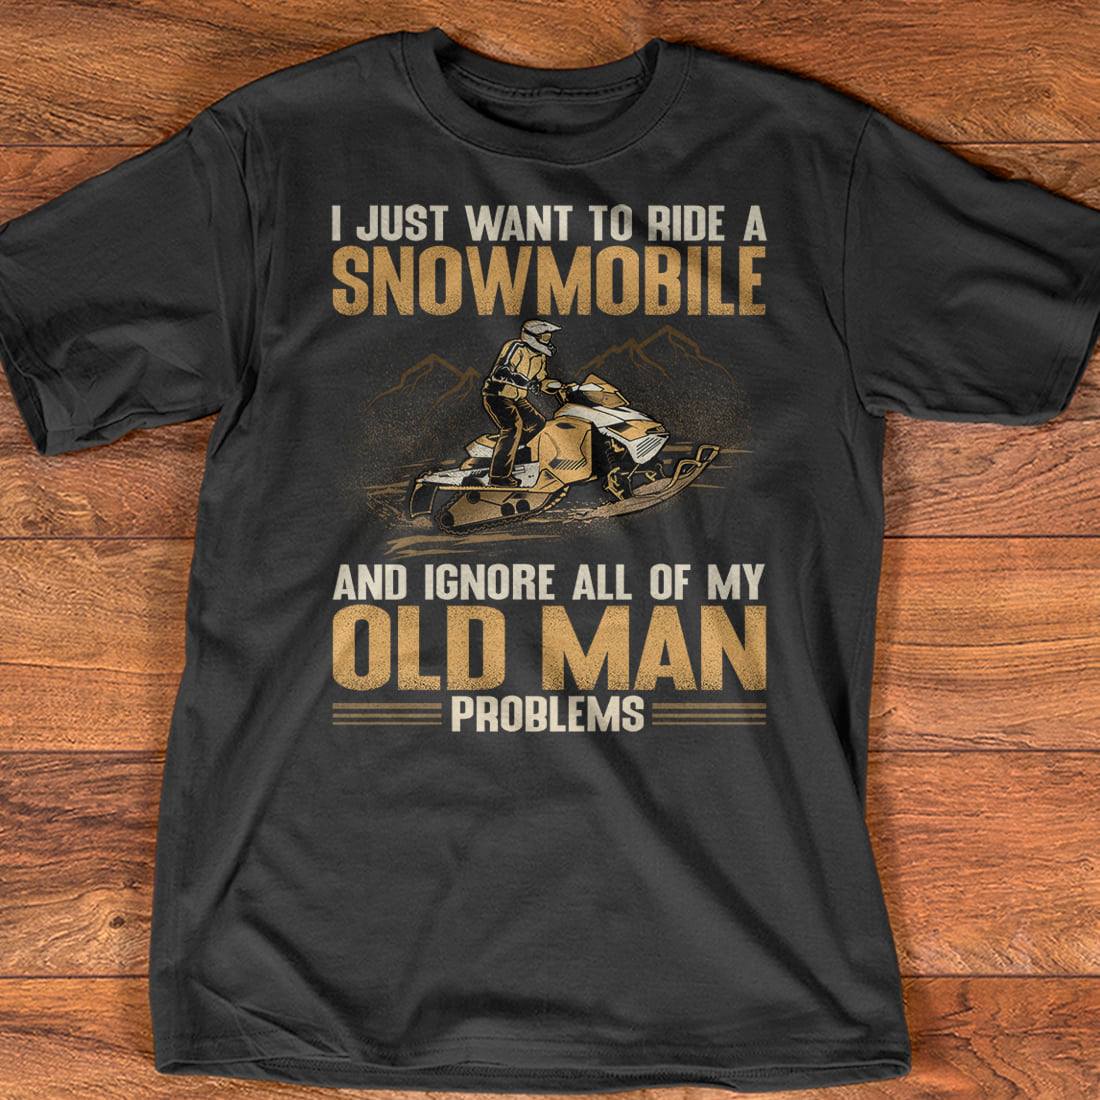 I just want to ride a snowmobile and ignore all of my old man problems